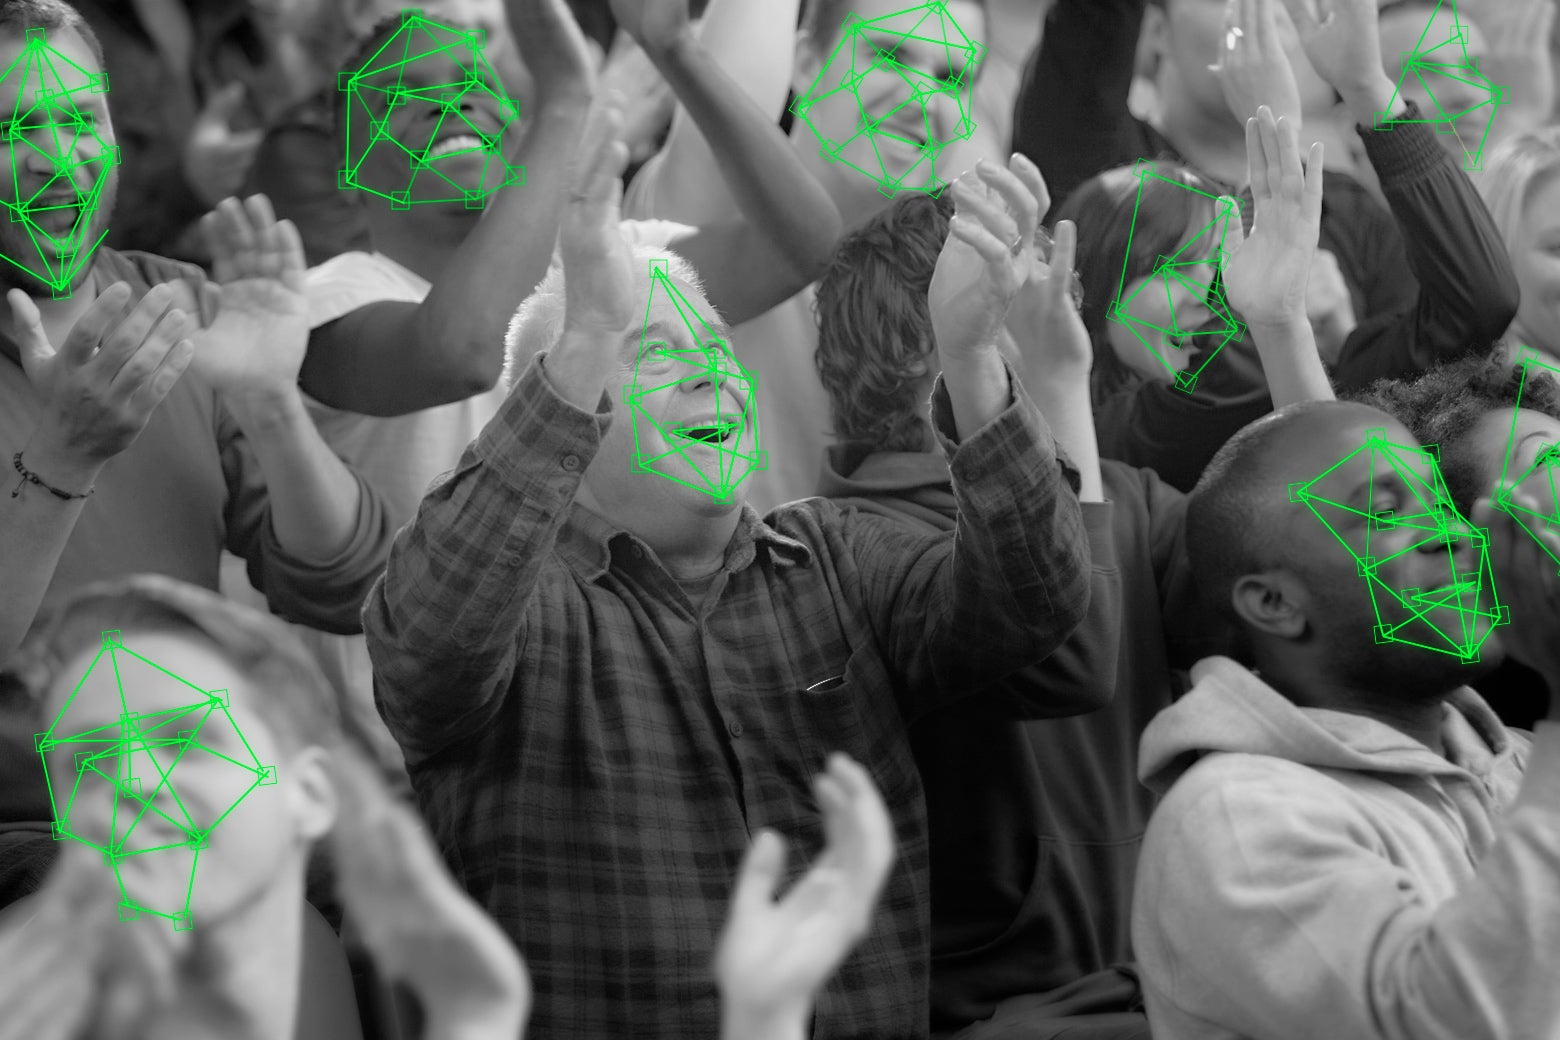 Fans cheer at a stadium, while green facial recognition tech scans their faces.